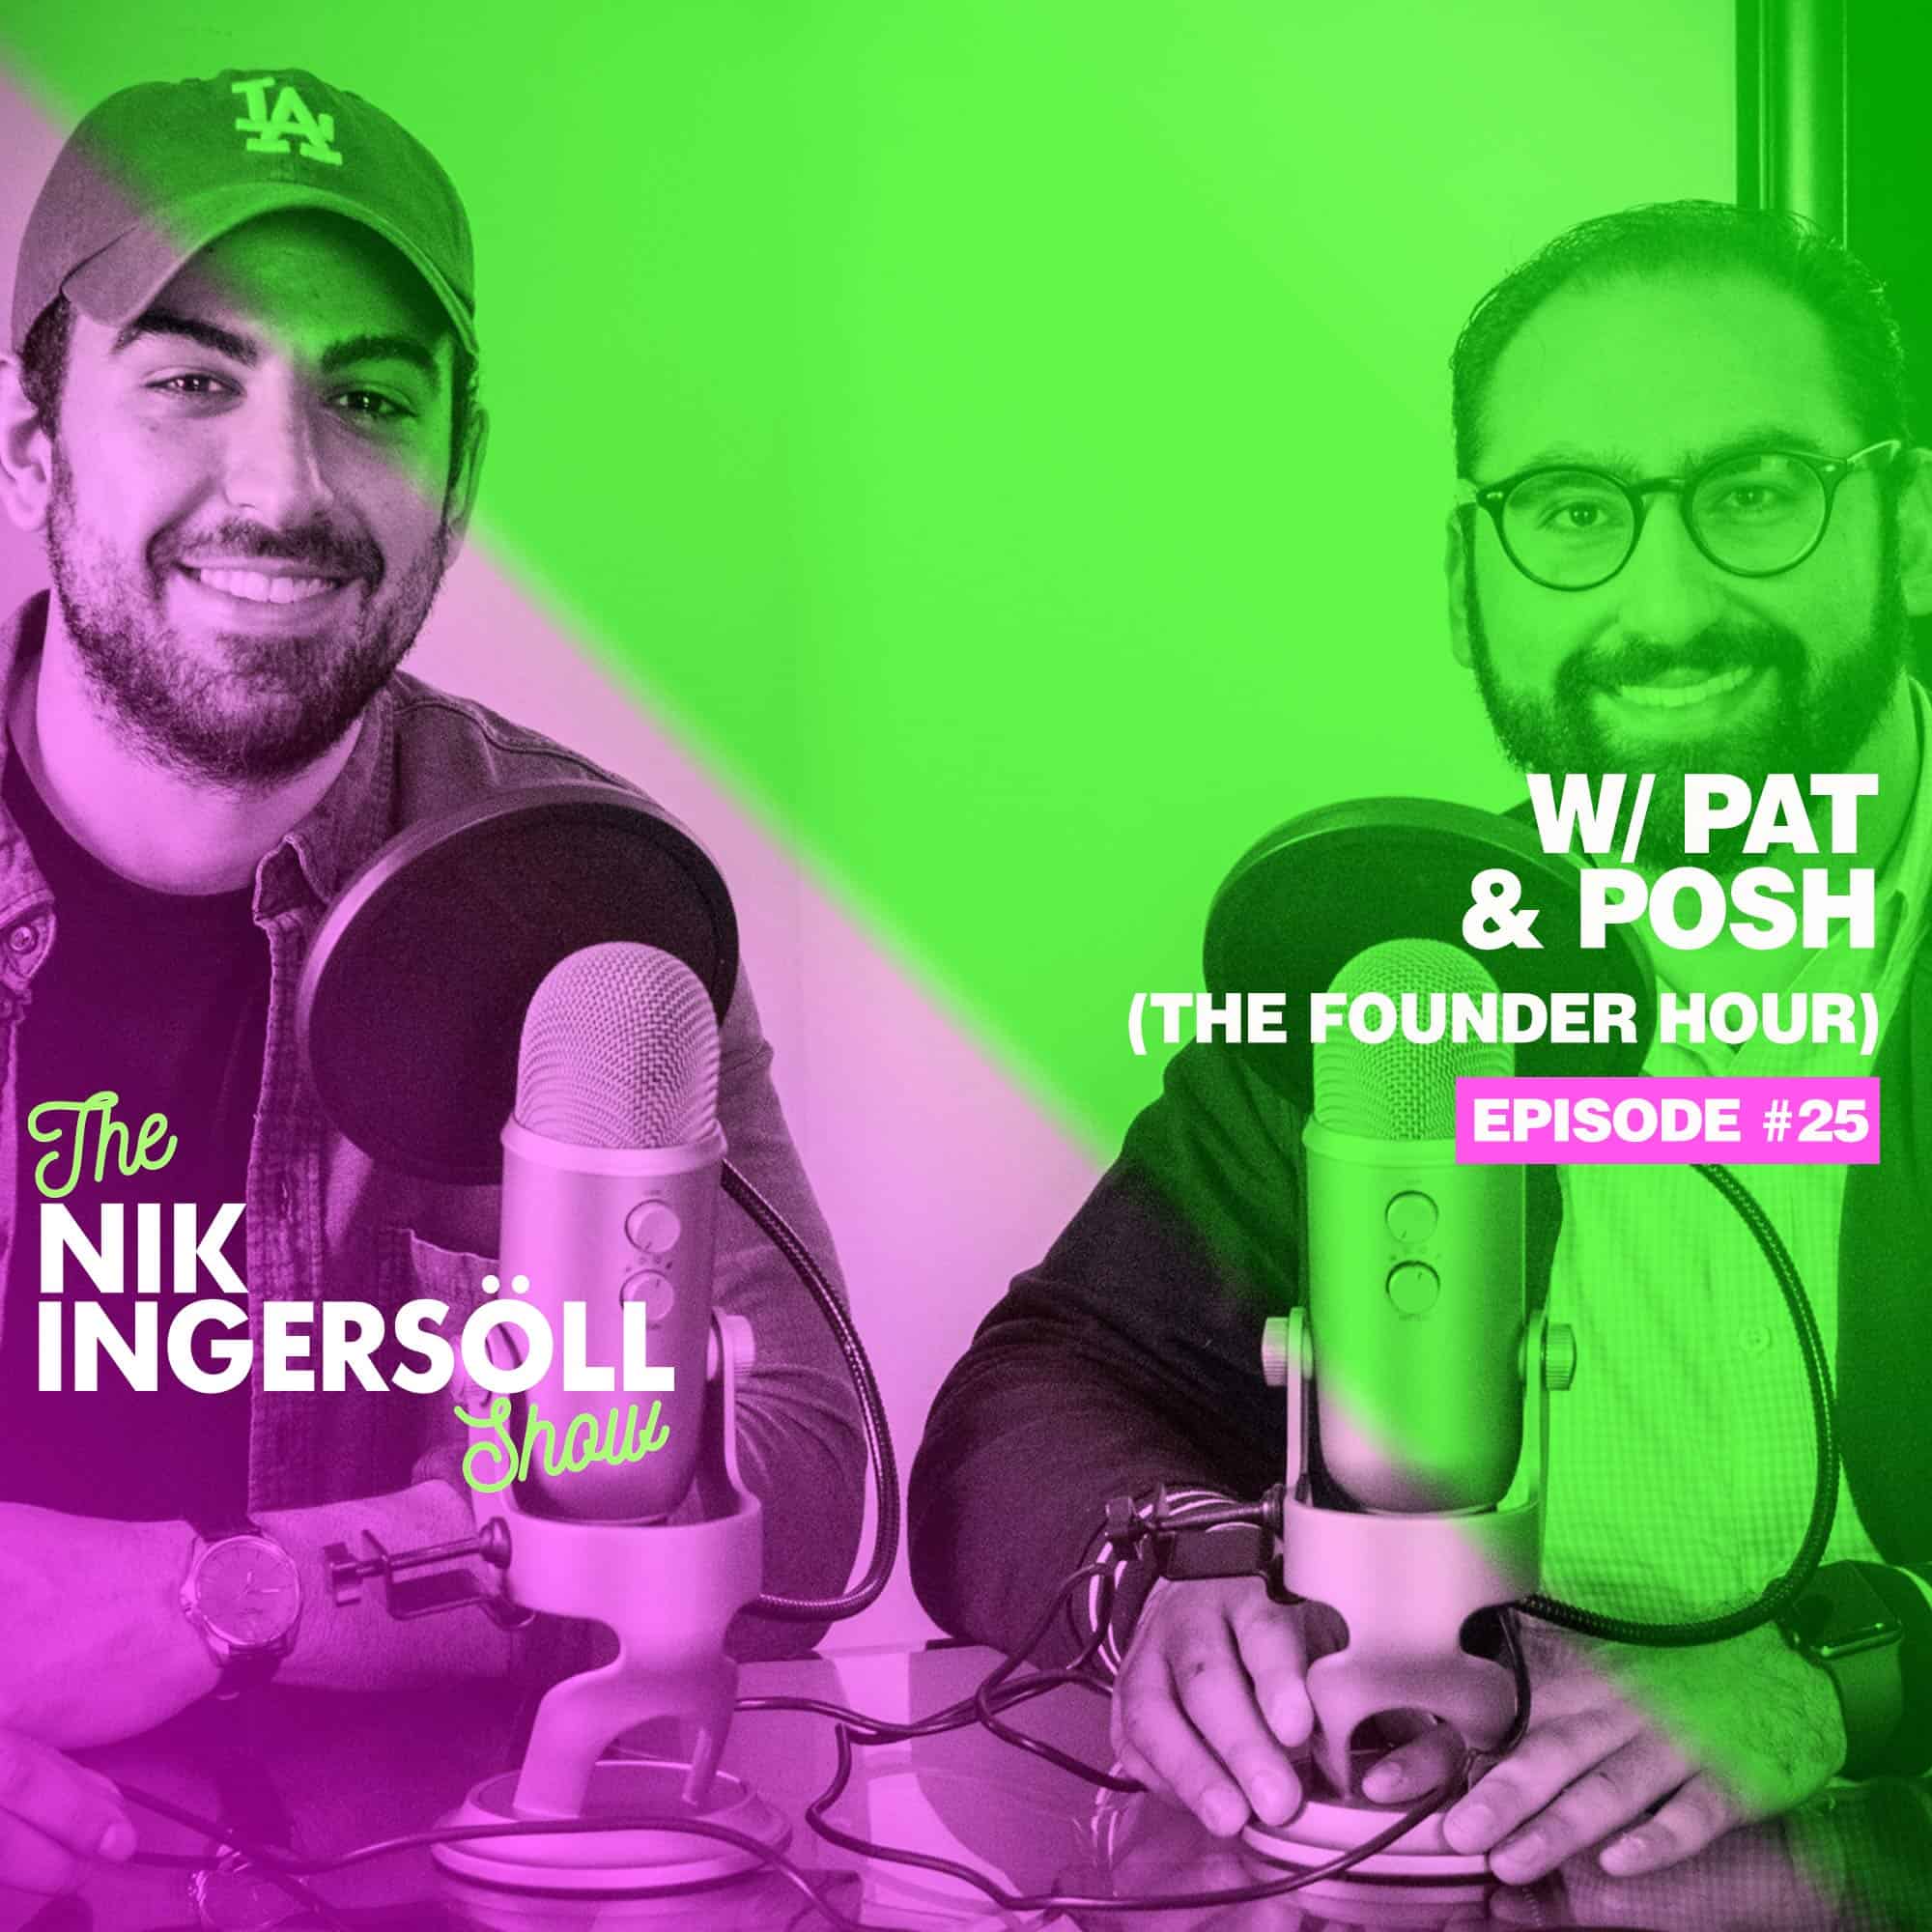 the founder hour podcast - pat & posh